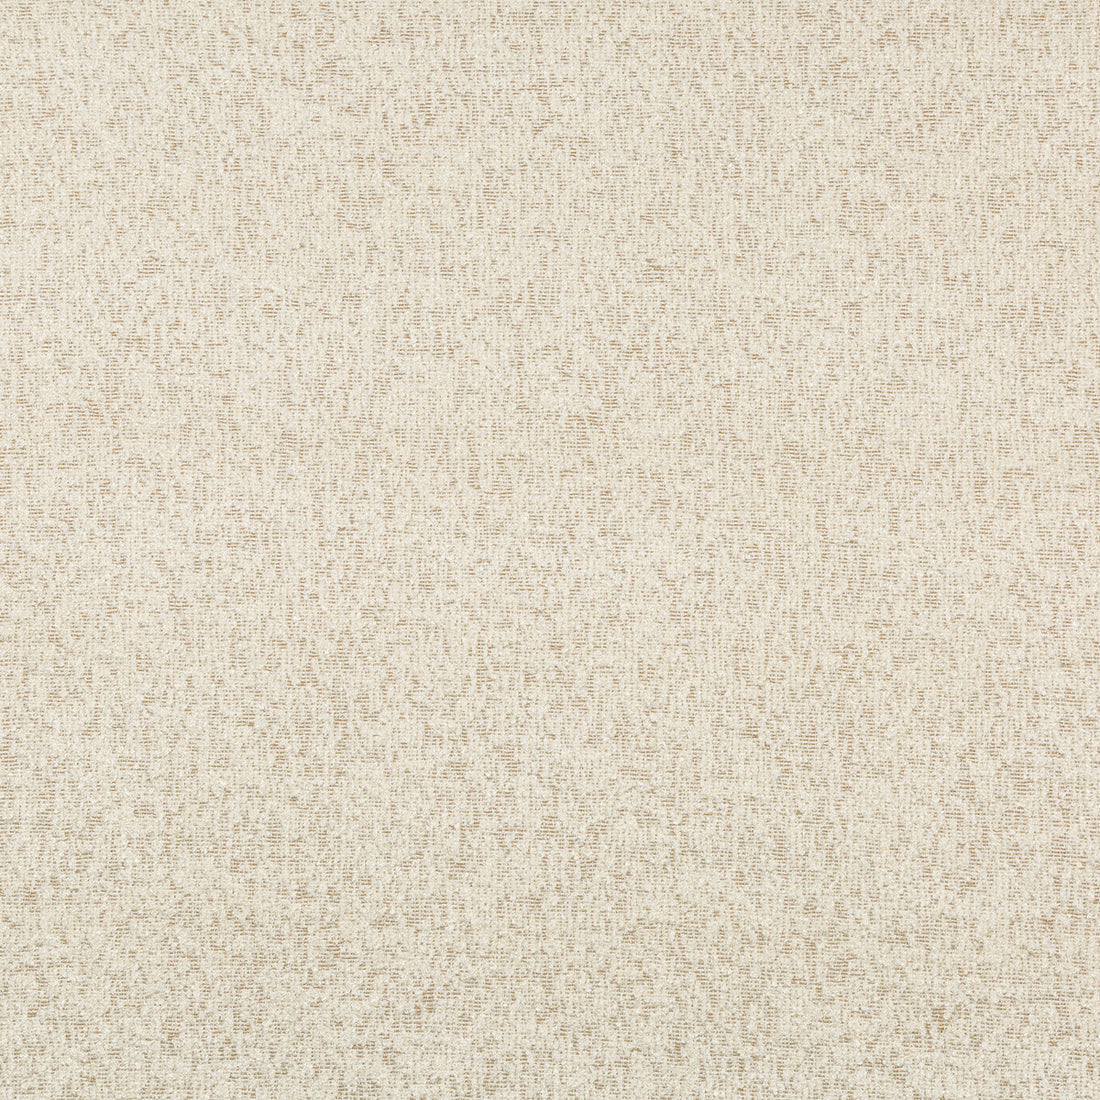 Above Board fabric in camel color - pattern 35921.116.0 - by Kravet Couture in the Vista collection